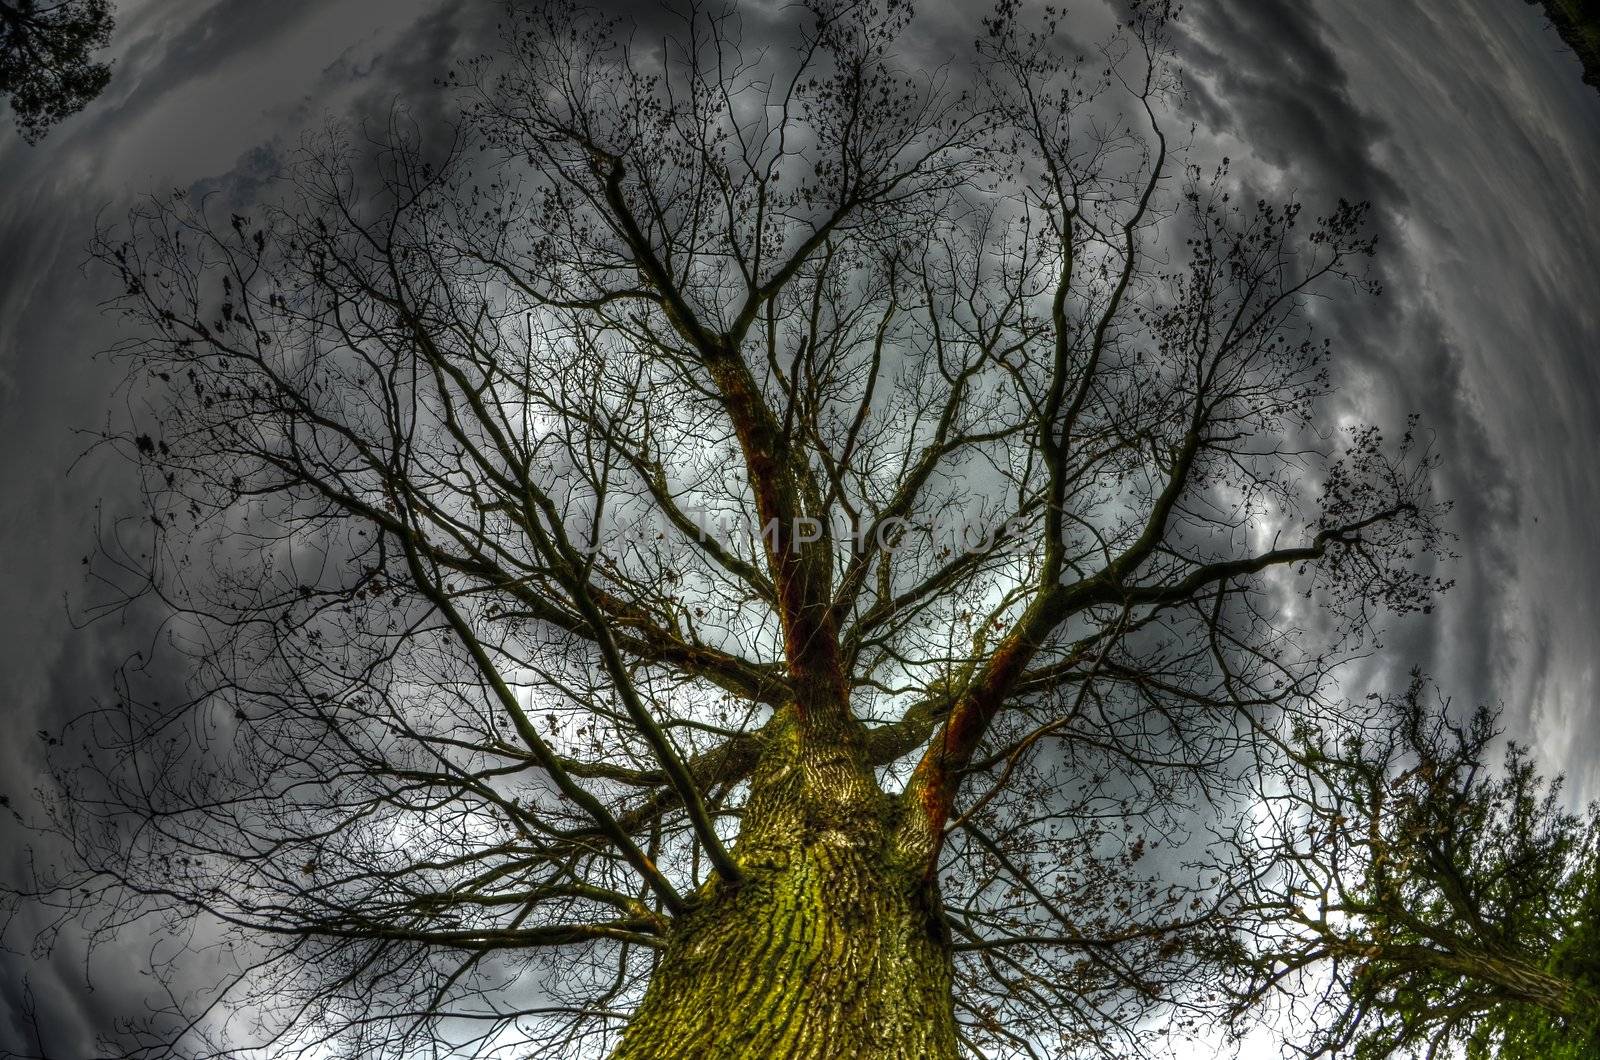 The photo shows an old oak crown in the rain, on a background of dark storm clouds.